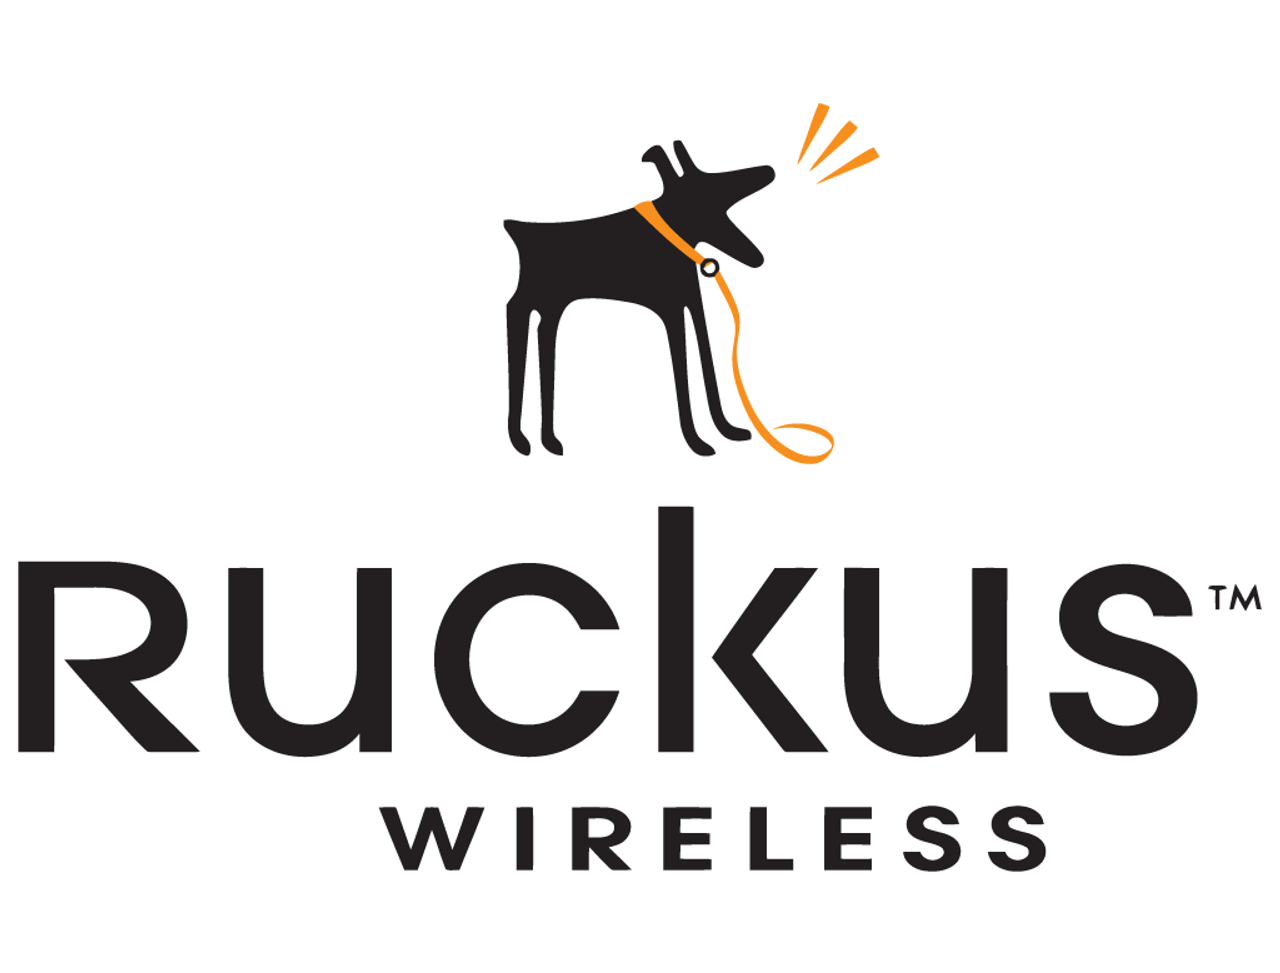 Ruckus Planner upgrade SKU - to upgrade from the 901-0100-0001 s/w to 901-0100-0002. Must have the older software to use the upgrade SKU.